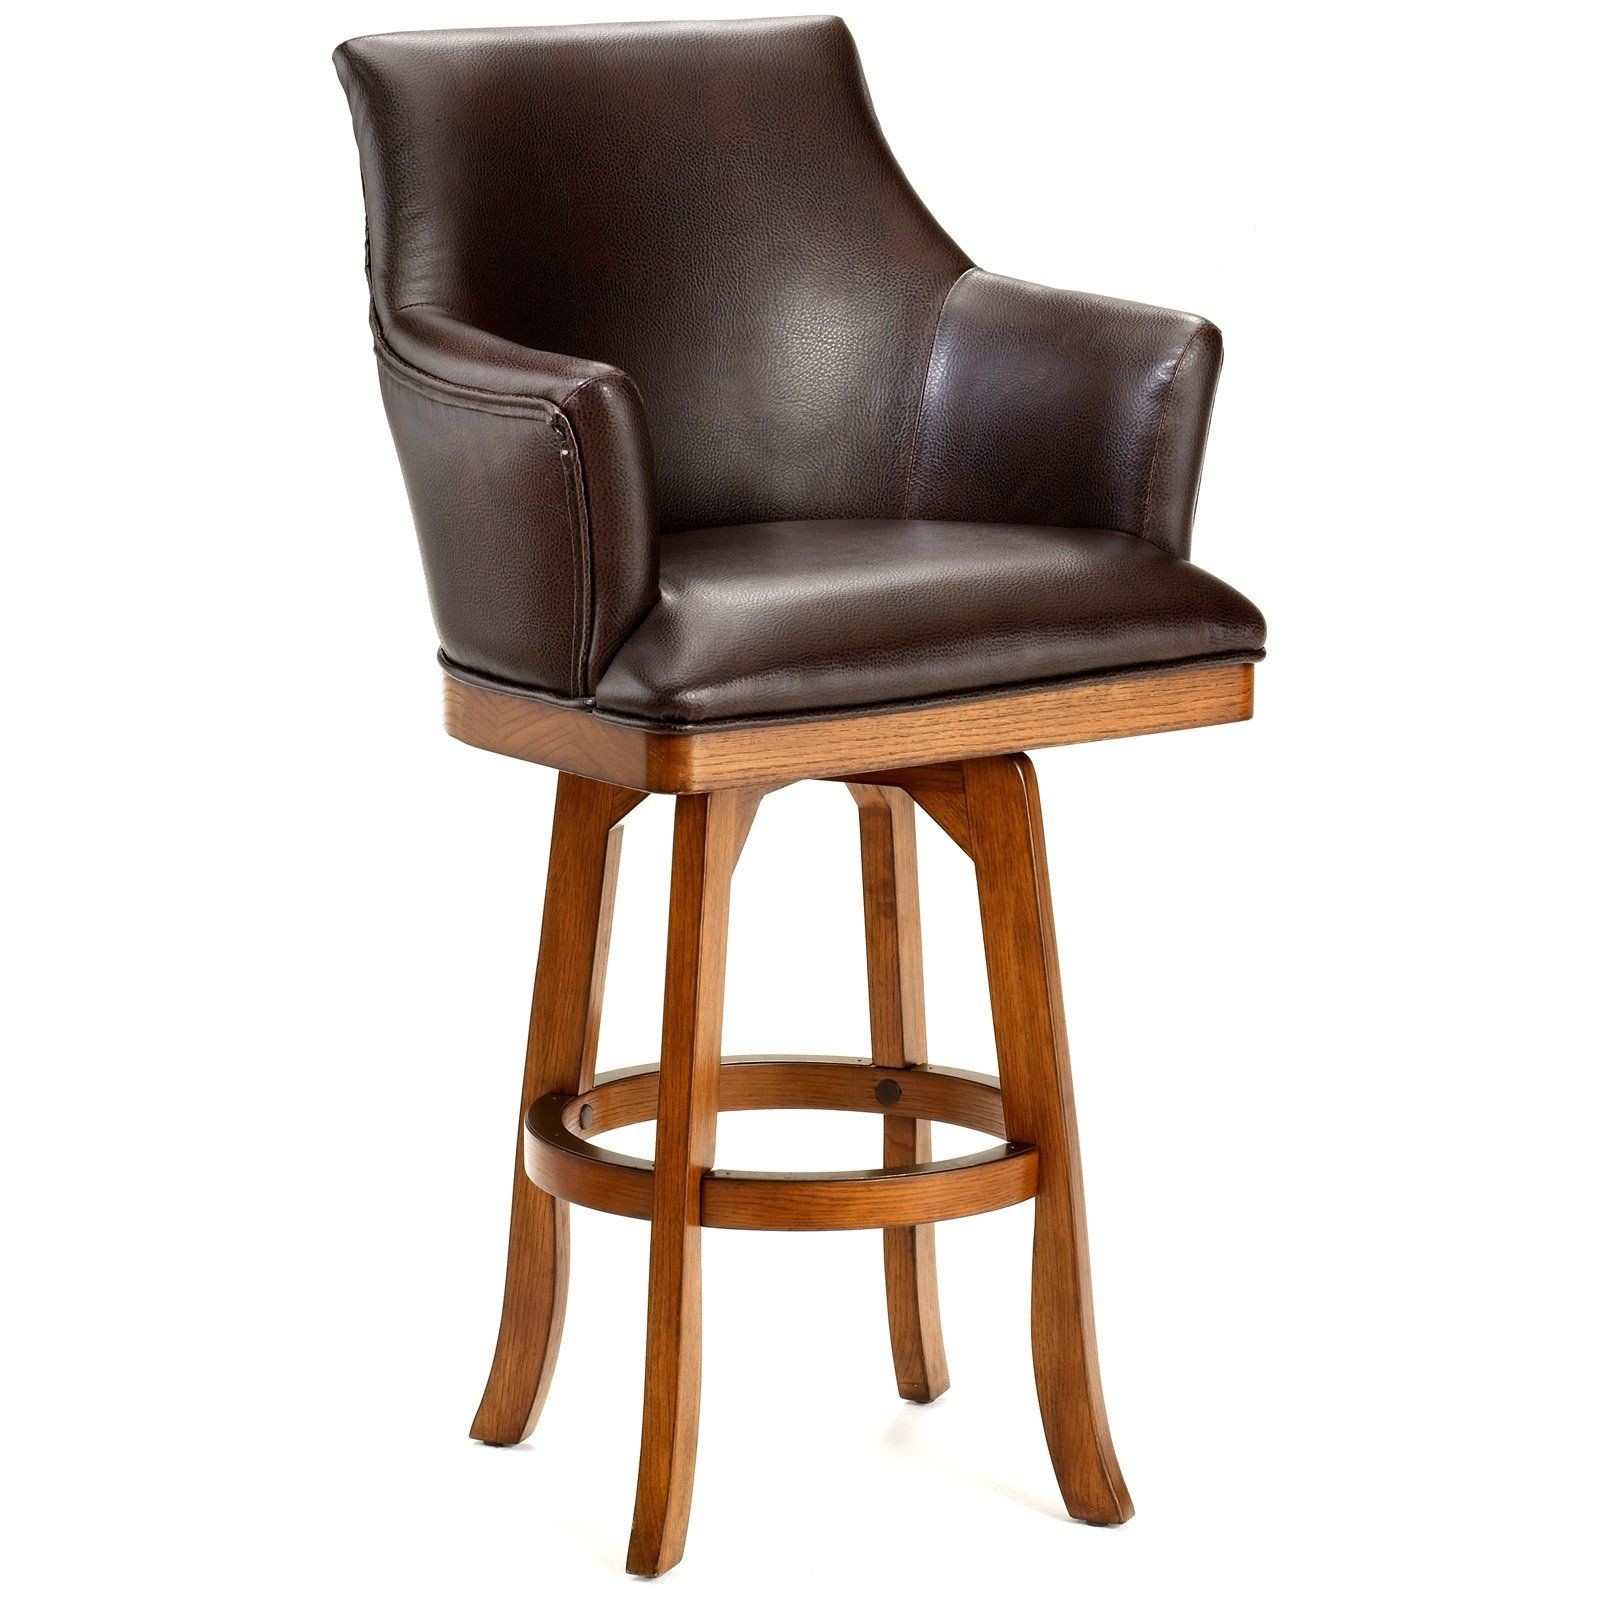 Bar stools with backs and arms 5